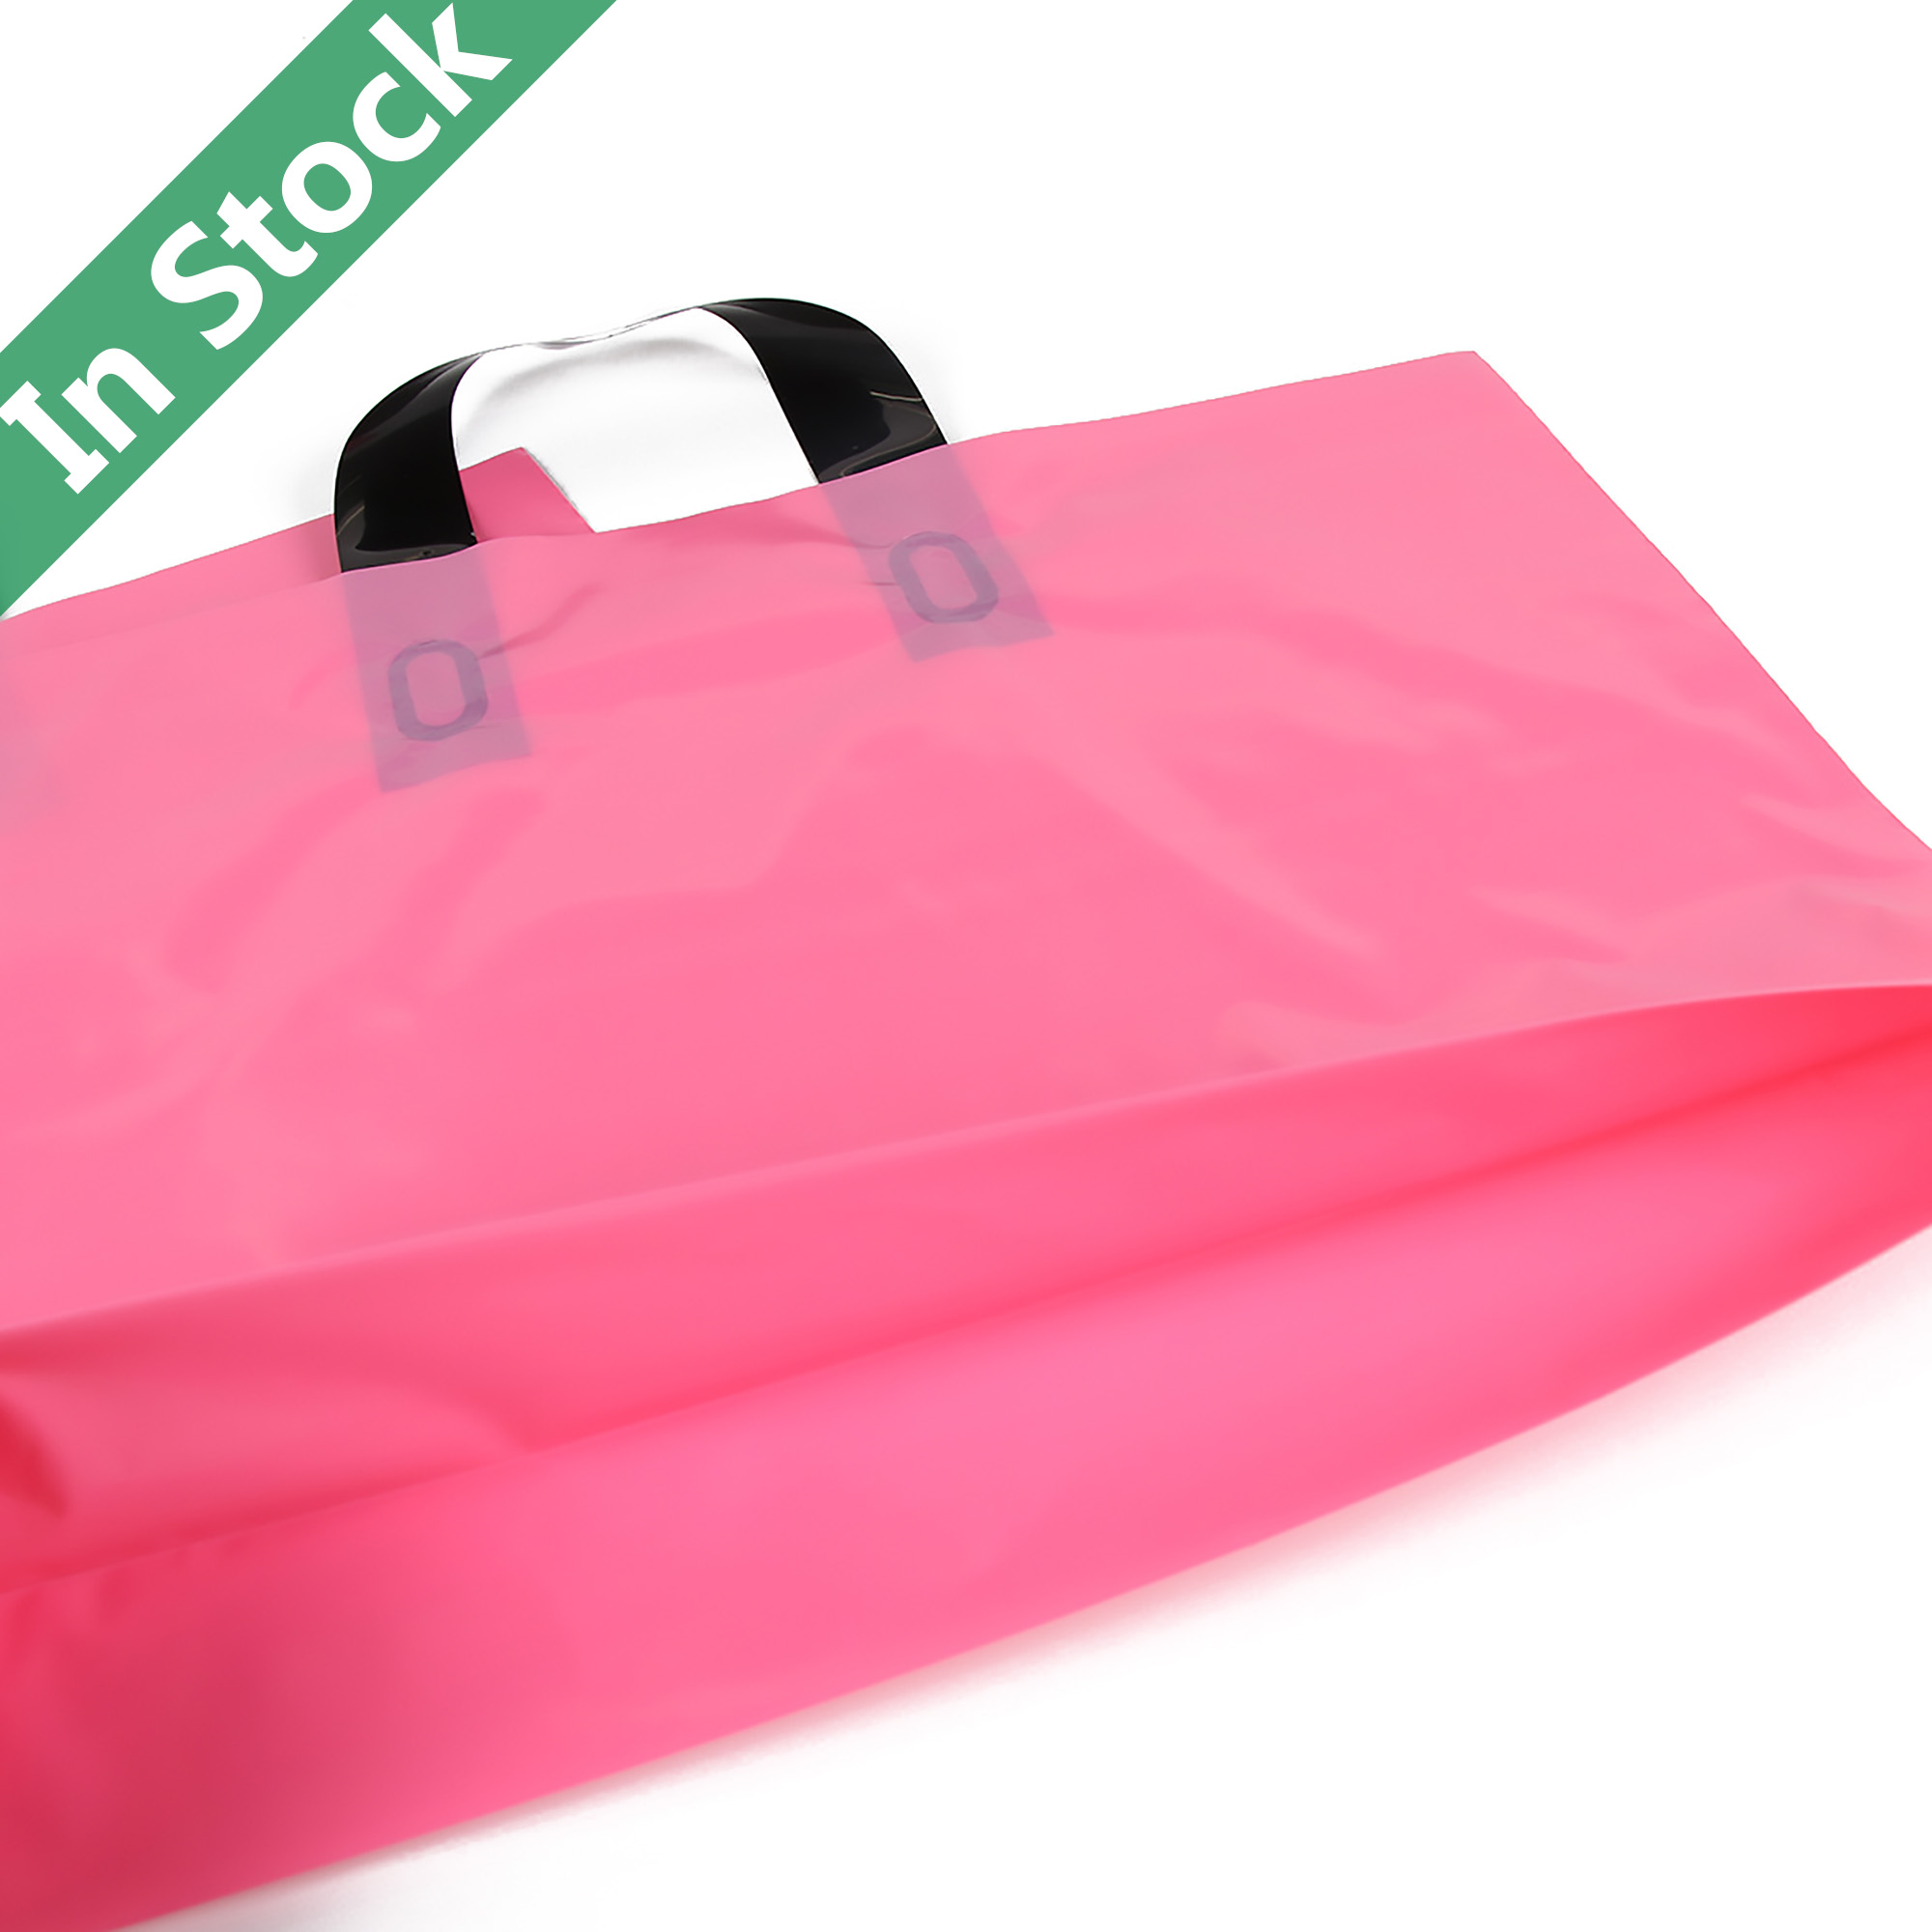 https://www.dreamcitypack.com/shoppic/customizable-soft-loop-handle-bags-gift-bags-shopping-bags-for-clothes-hotpink-a.jpg